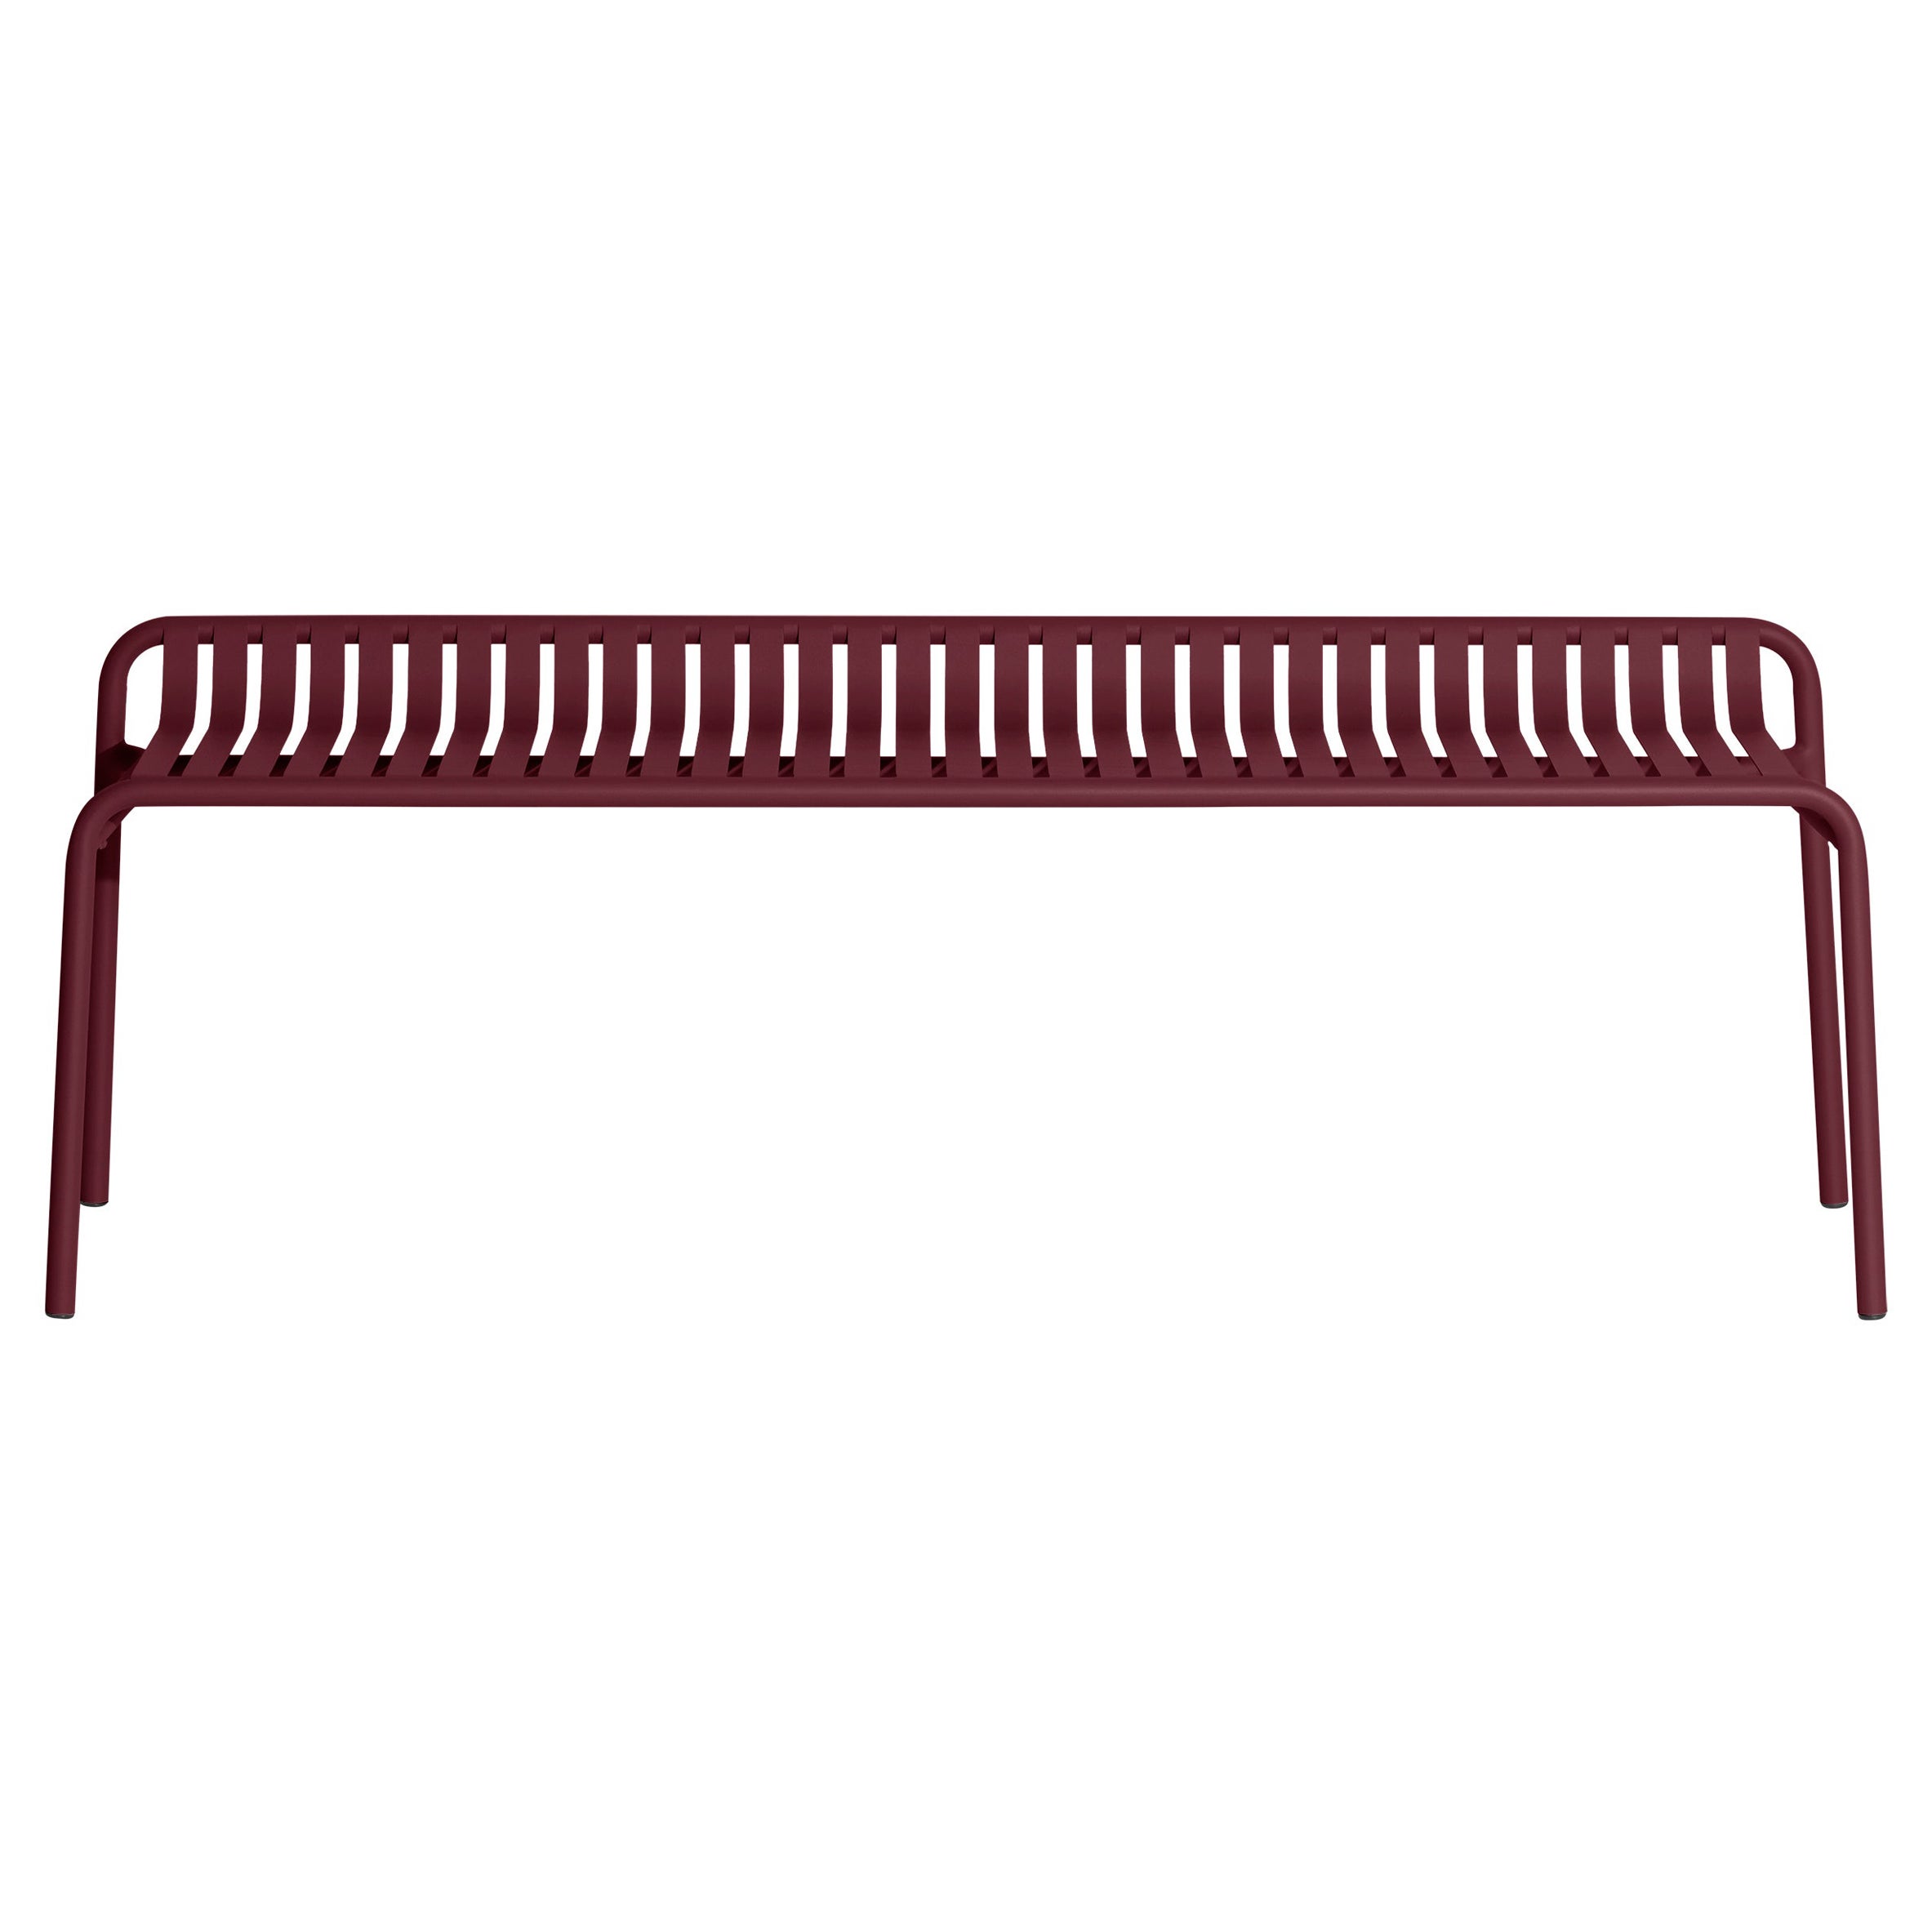 Petite Friture Week-End Bench without Back in Burgundy Aluminium, 2017 